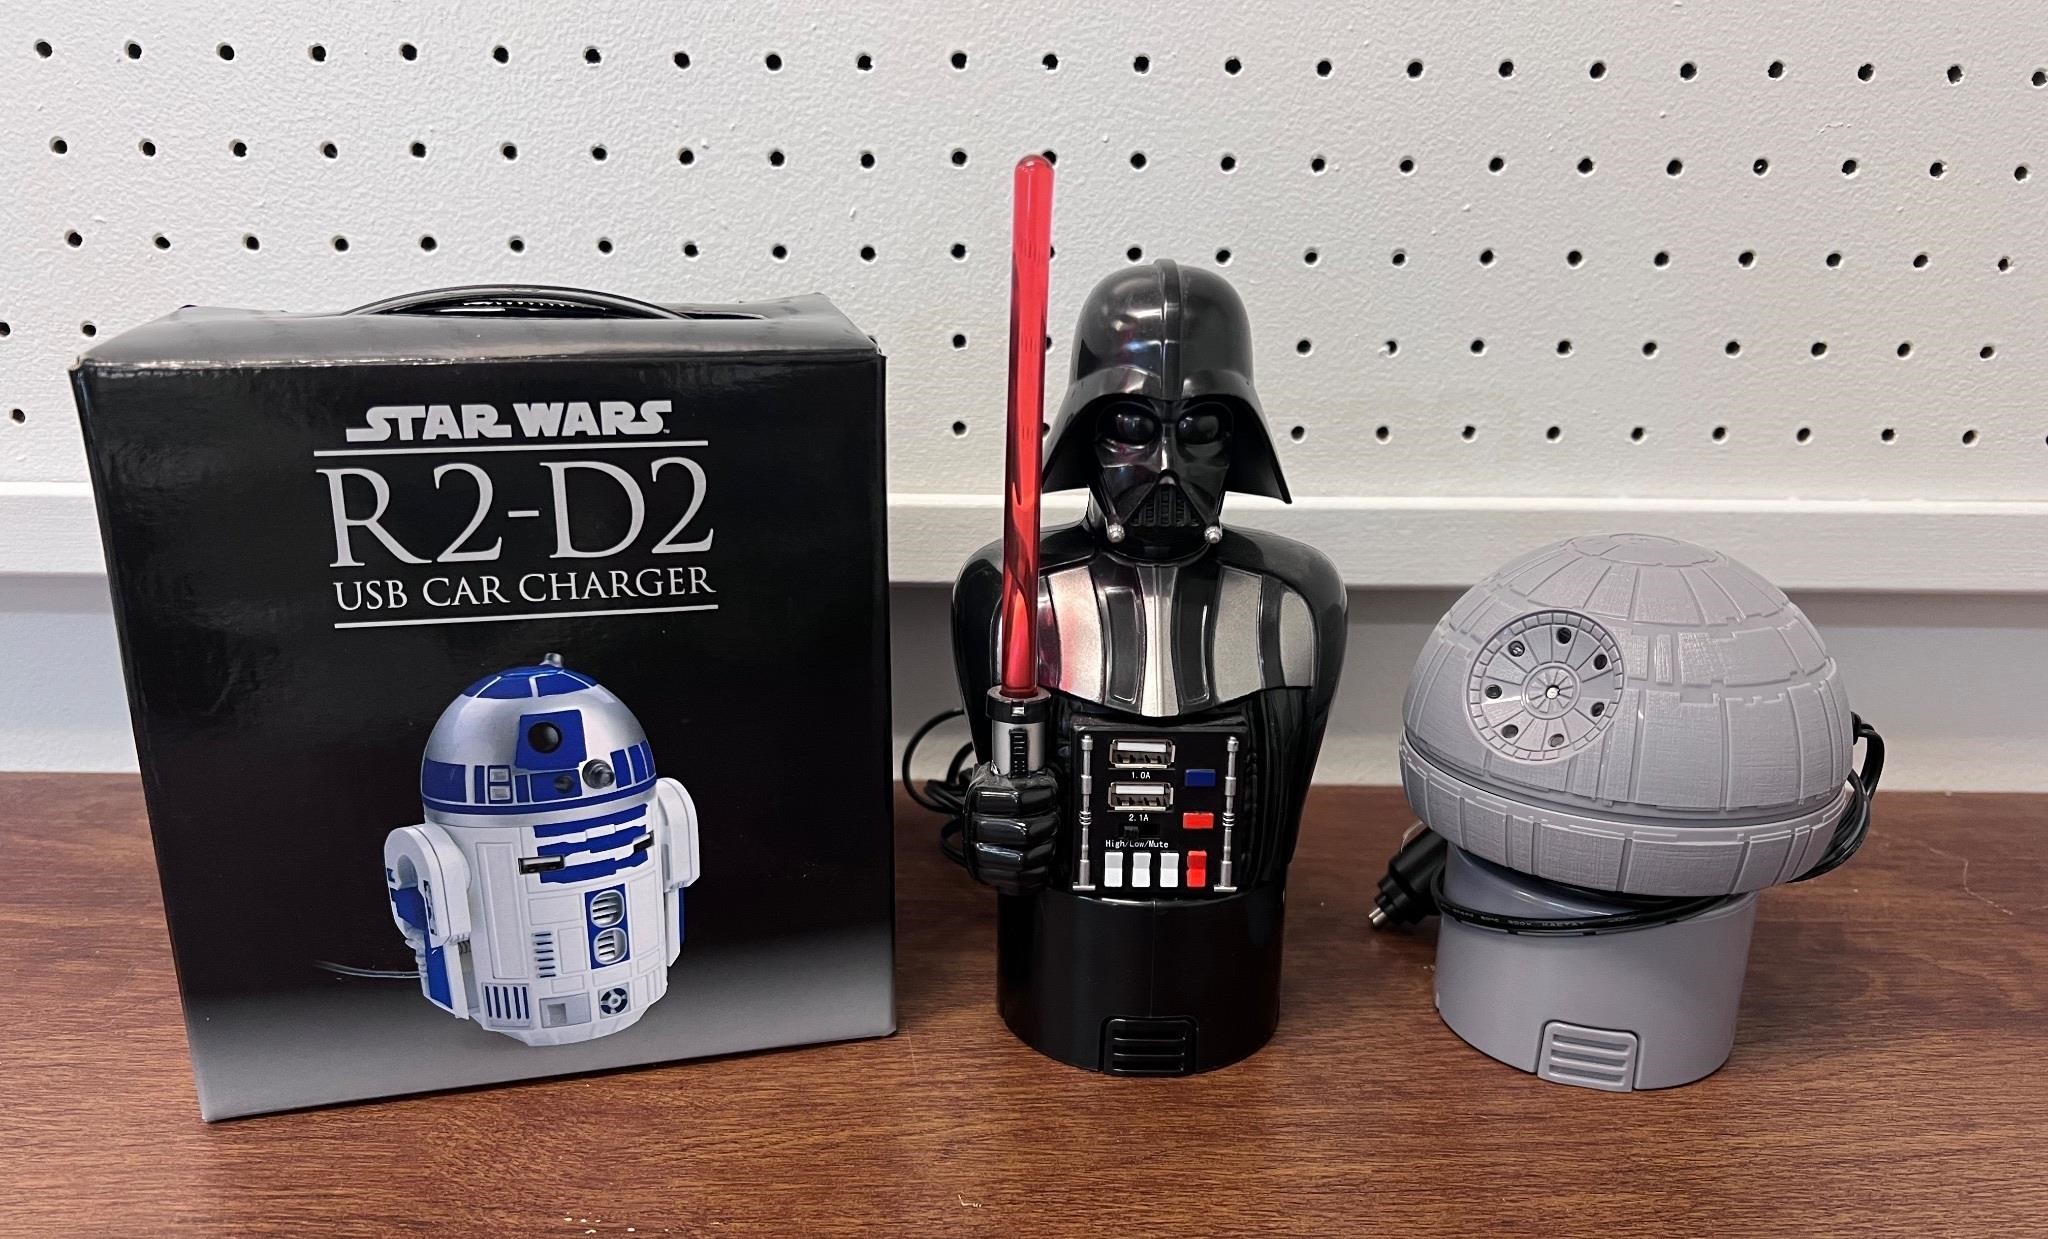 Lot of 3 Star Wars USB car cupholder chargers